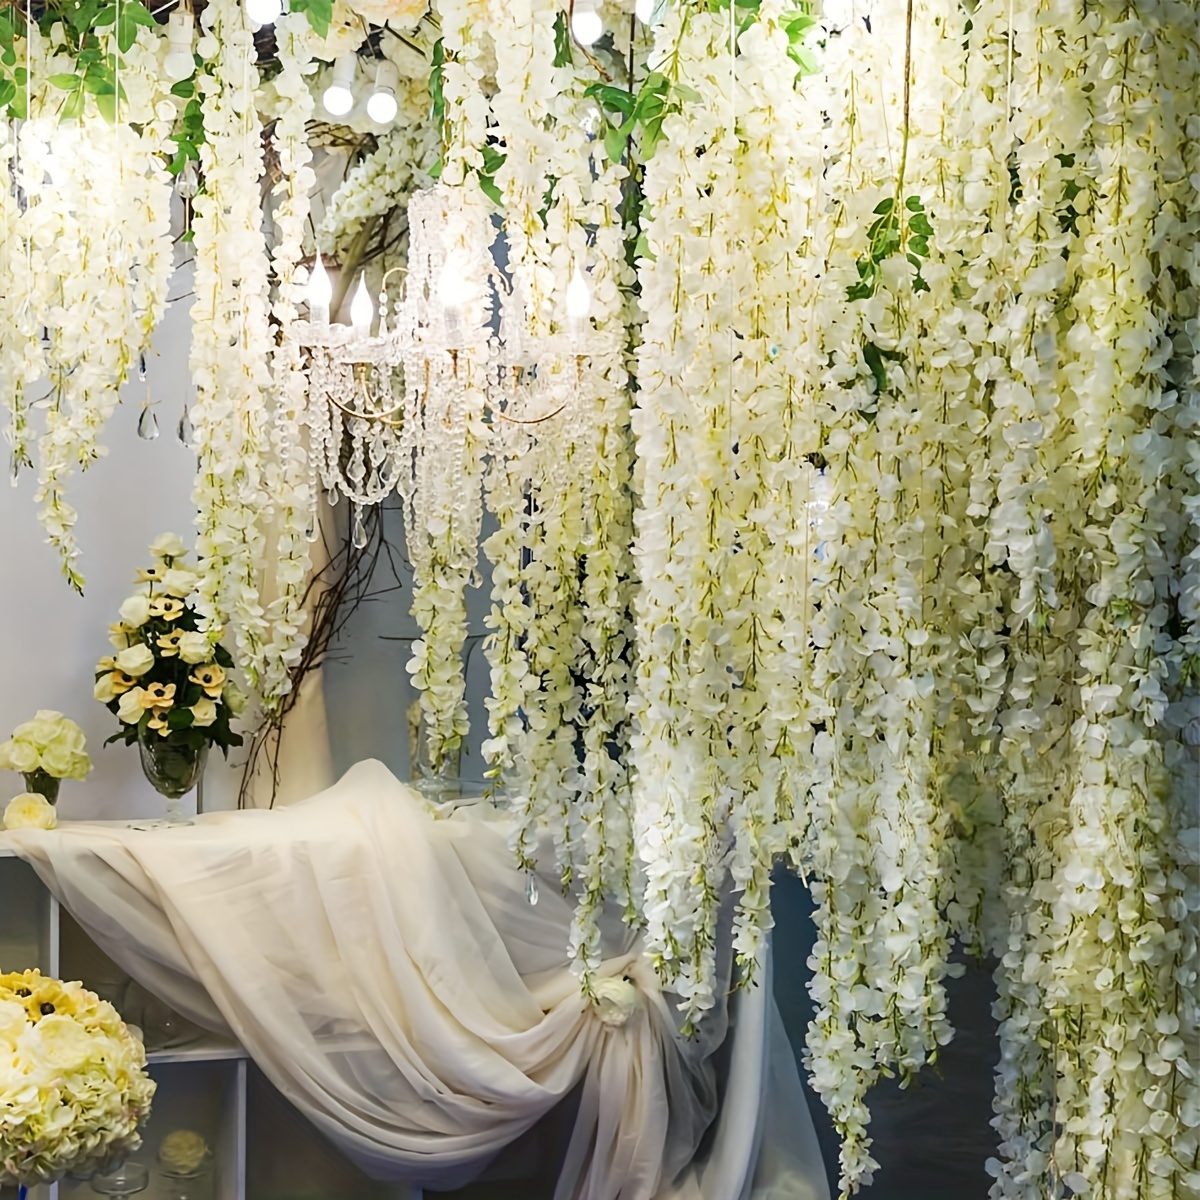 

Fake Hanging Flowers - 12 Pieces Artificial Wisteria Vine Ratta Hanging Garland Silk Flowers For Home Party Wedding Decor (white)